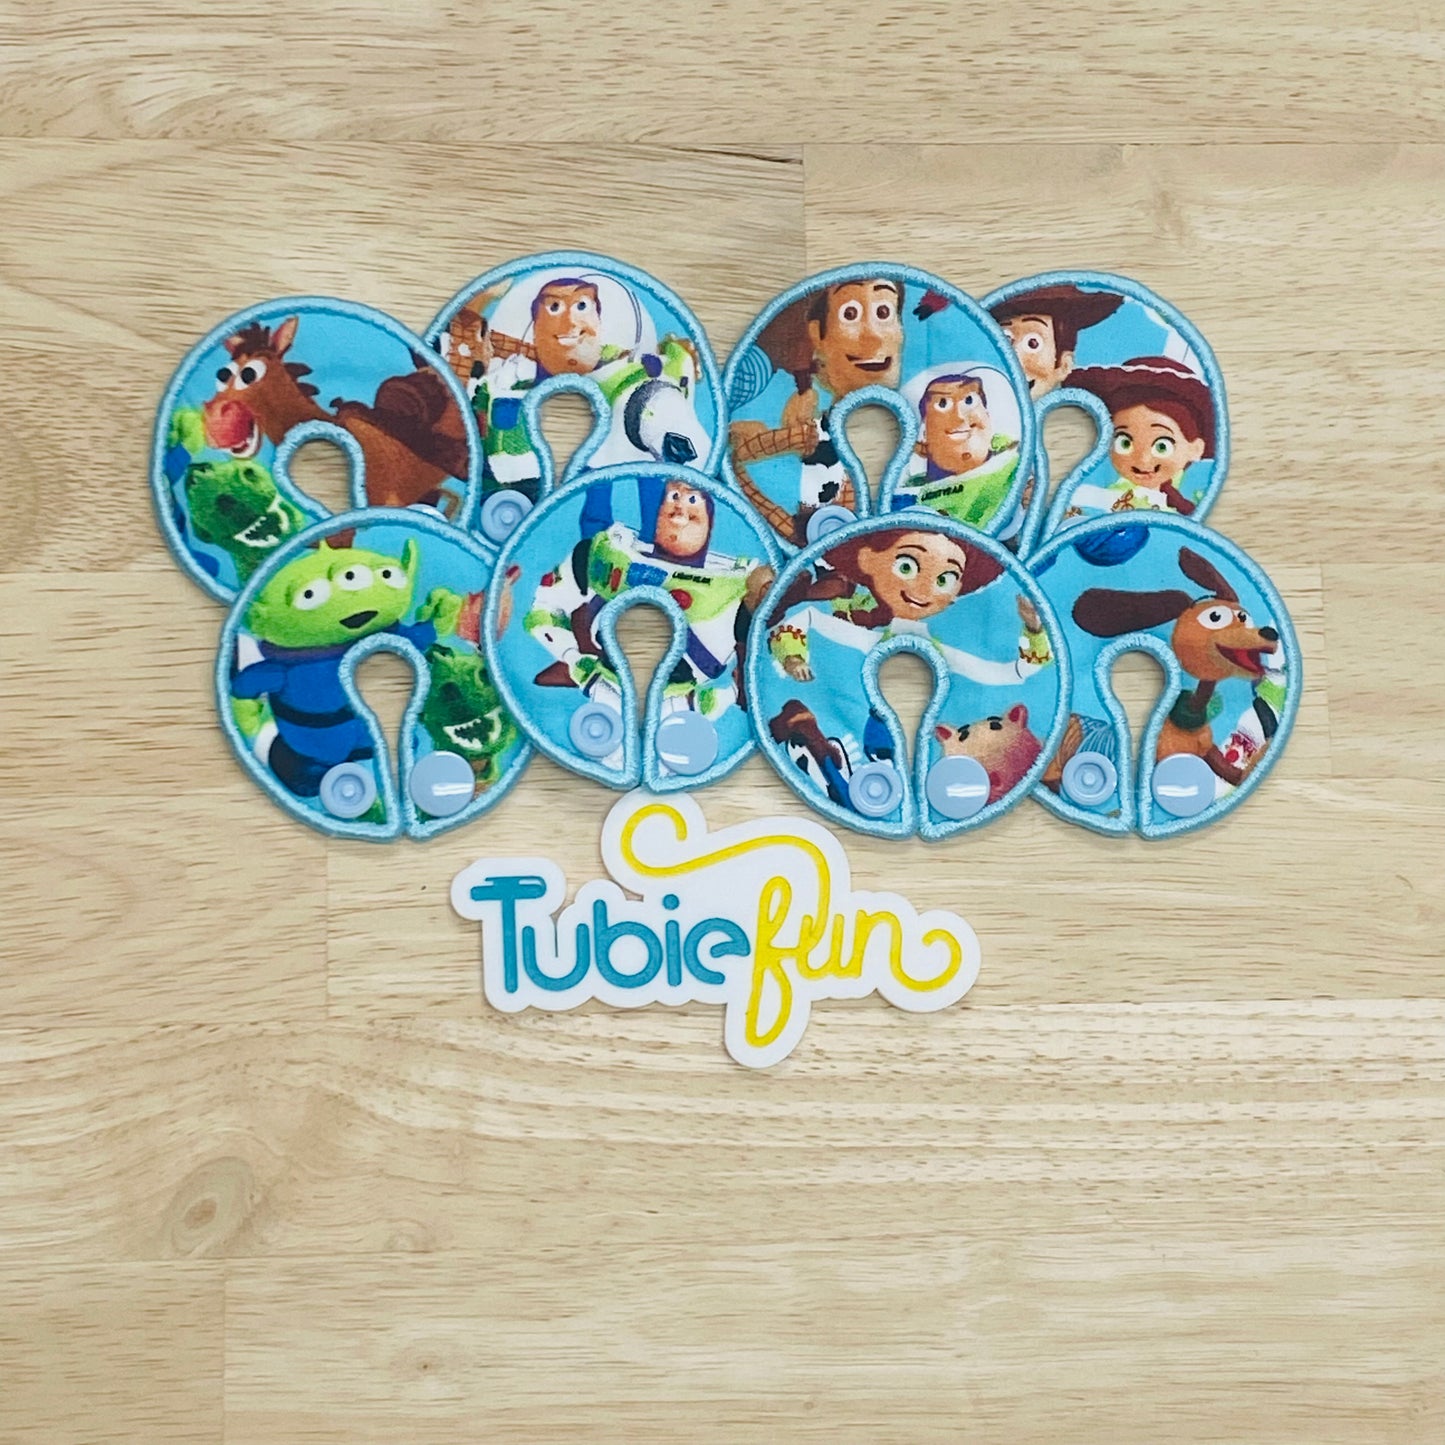 G-Tube Button Pad Cover - Toy Characters on Blue